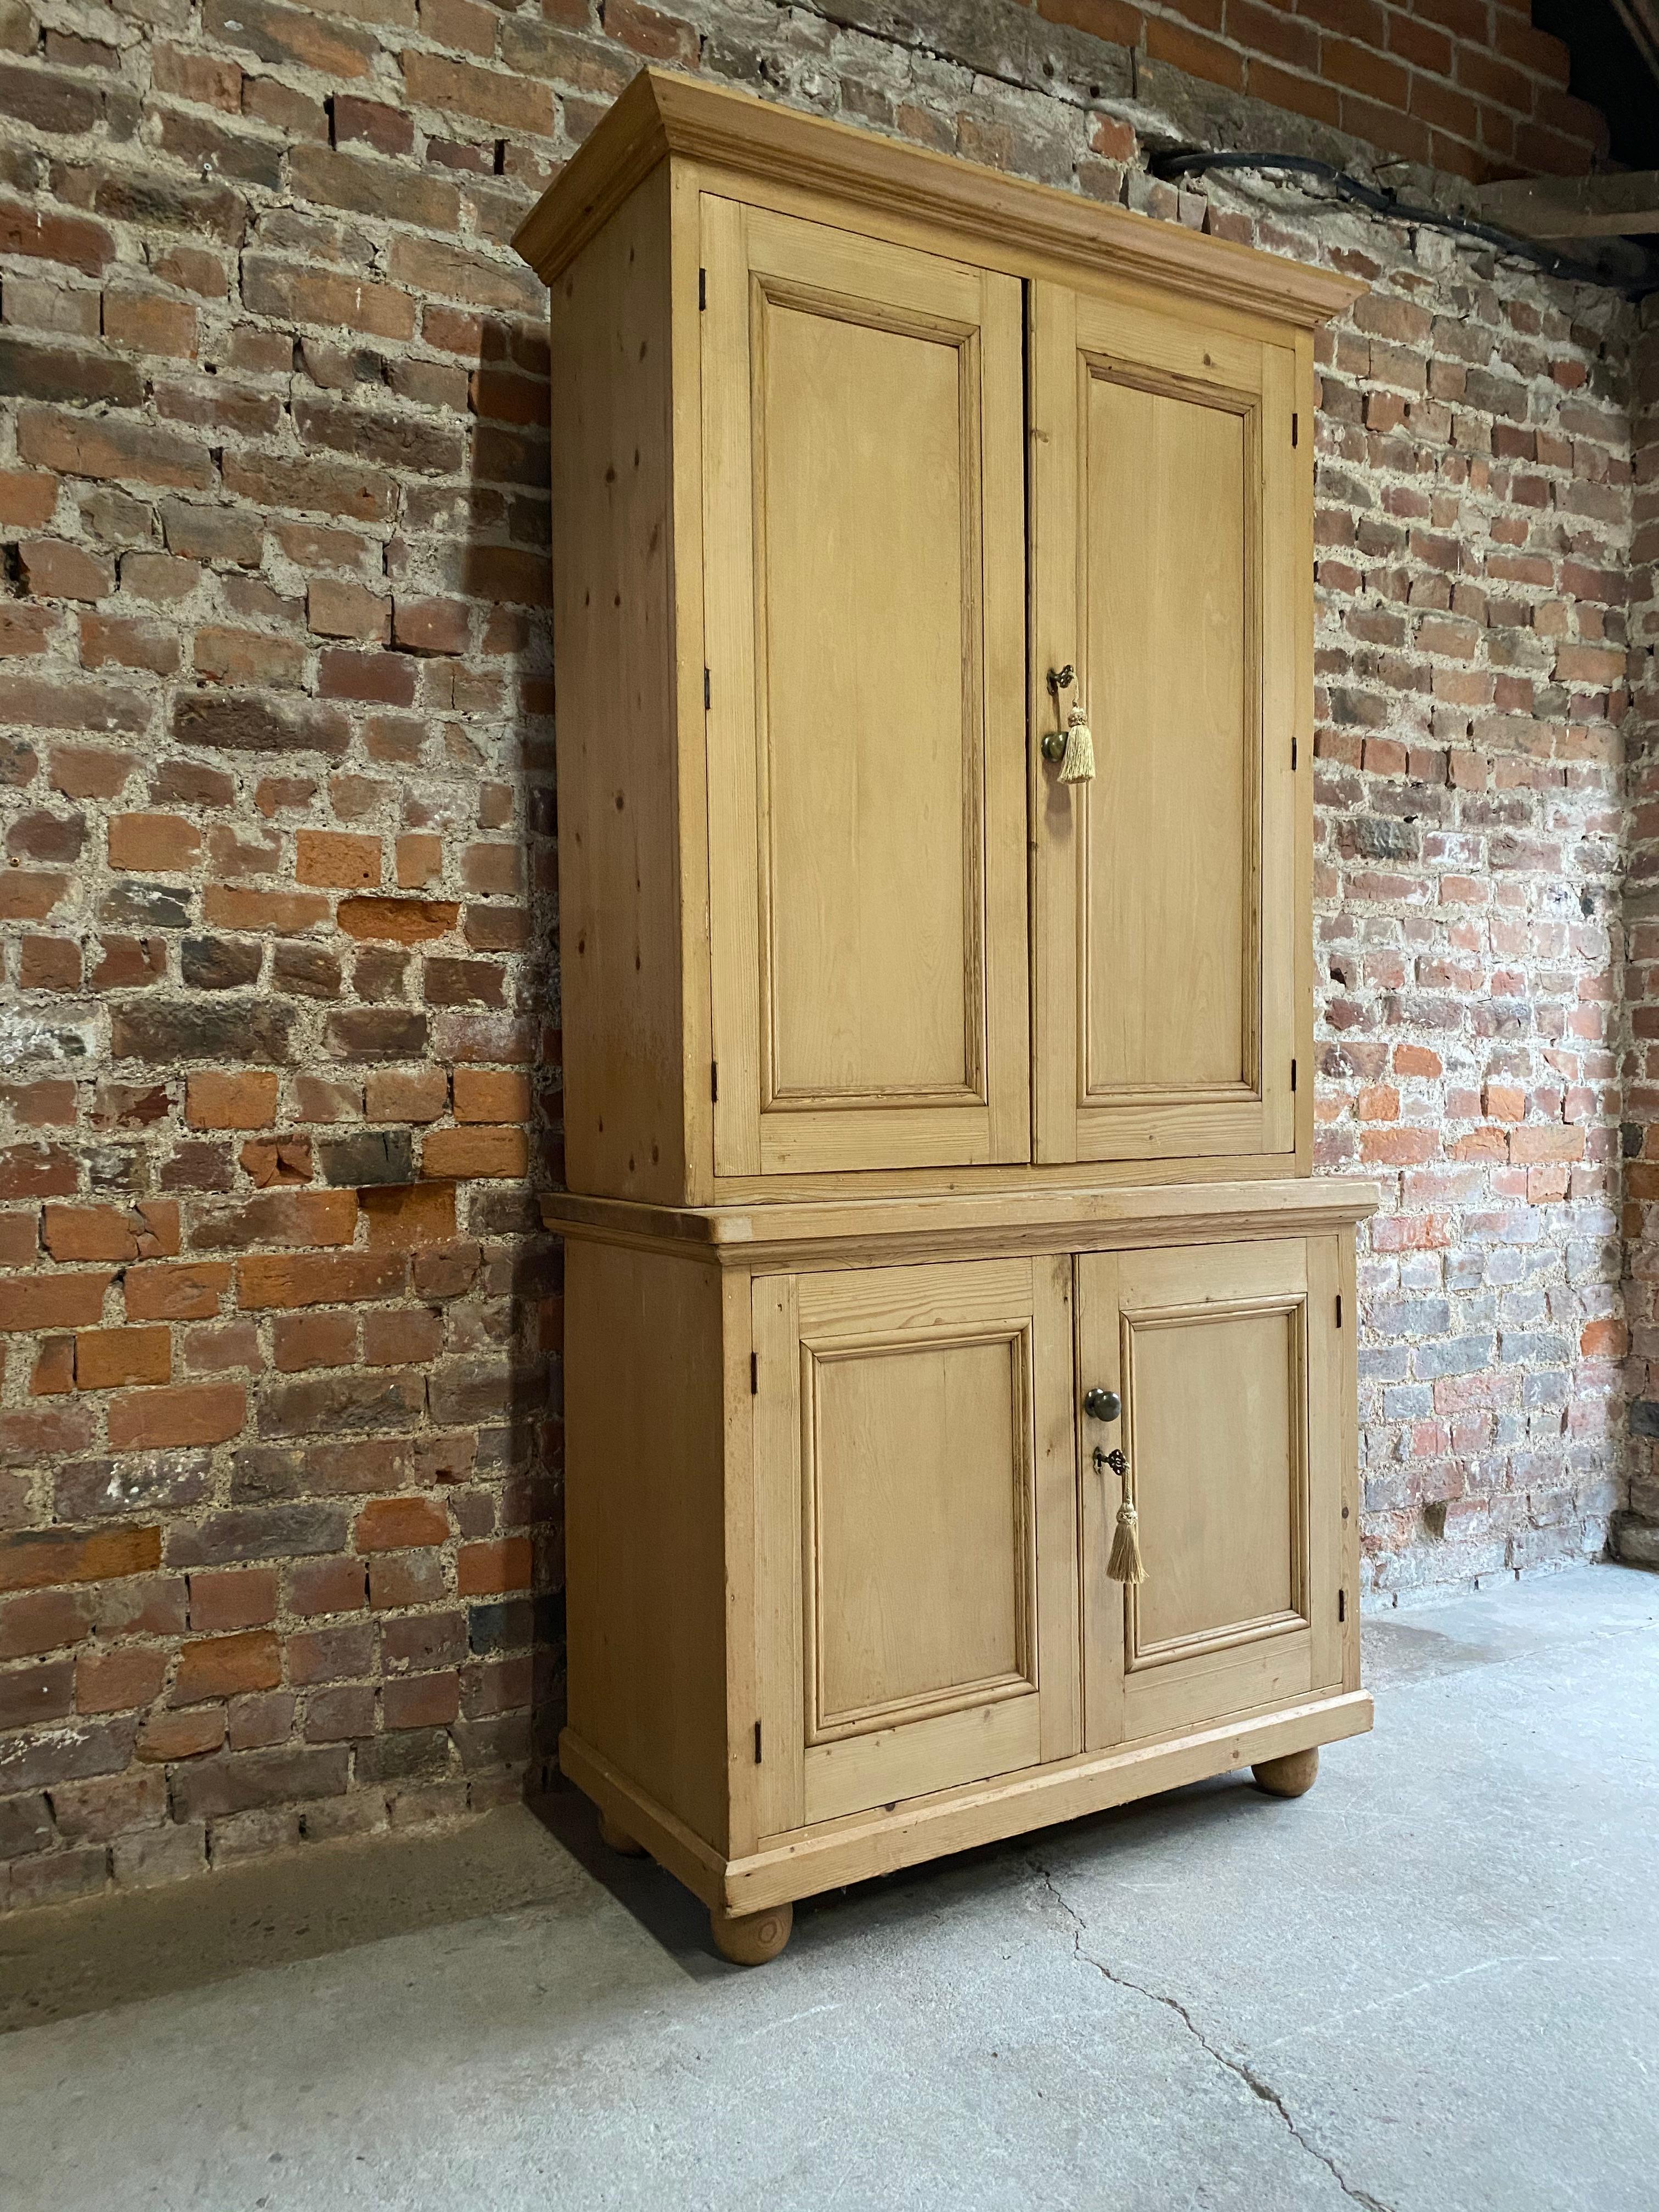 British Victorian Pine Housekeepers Cupboard Pantry Antique, 19th Century, circa 1890 